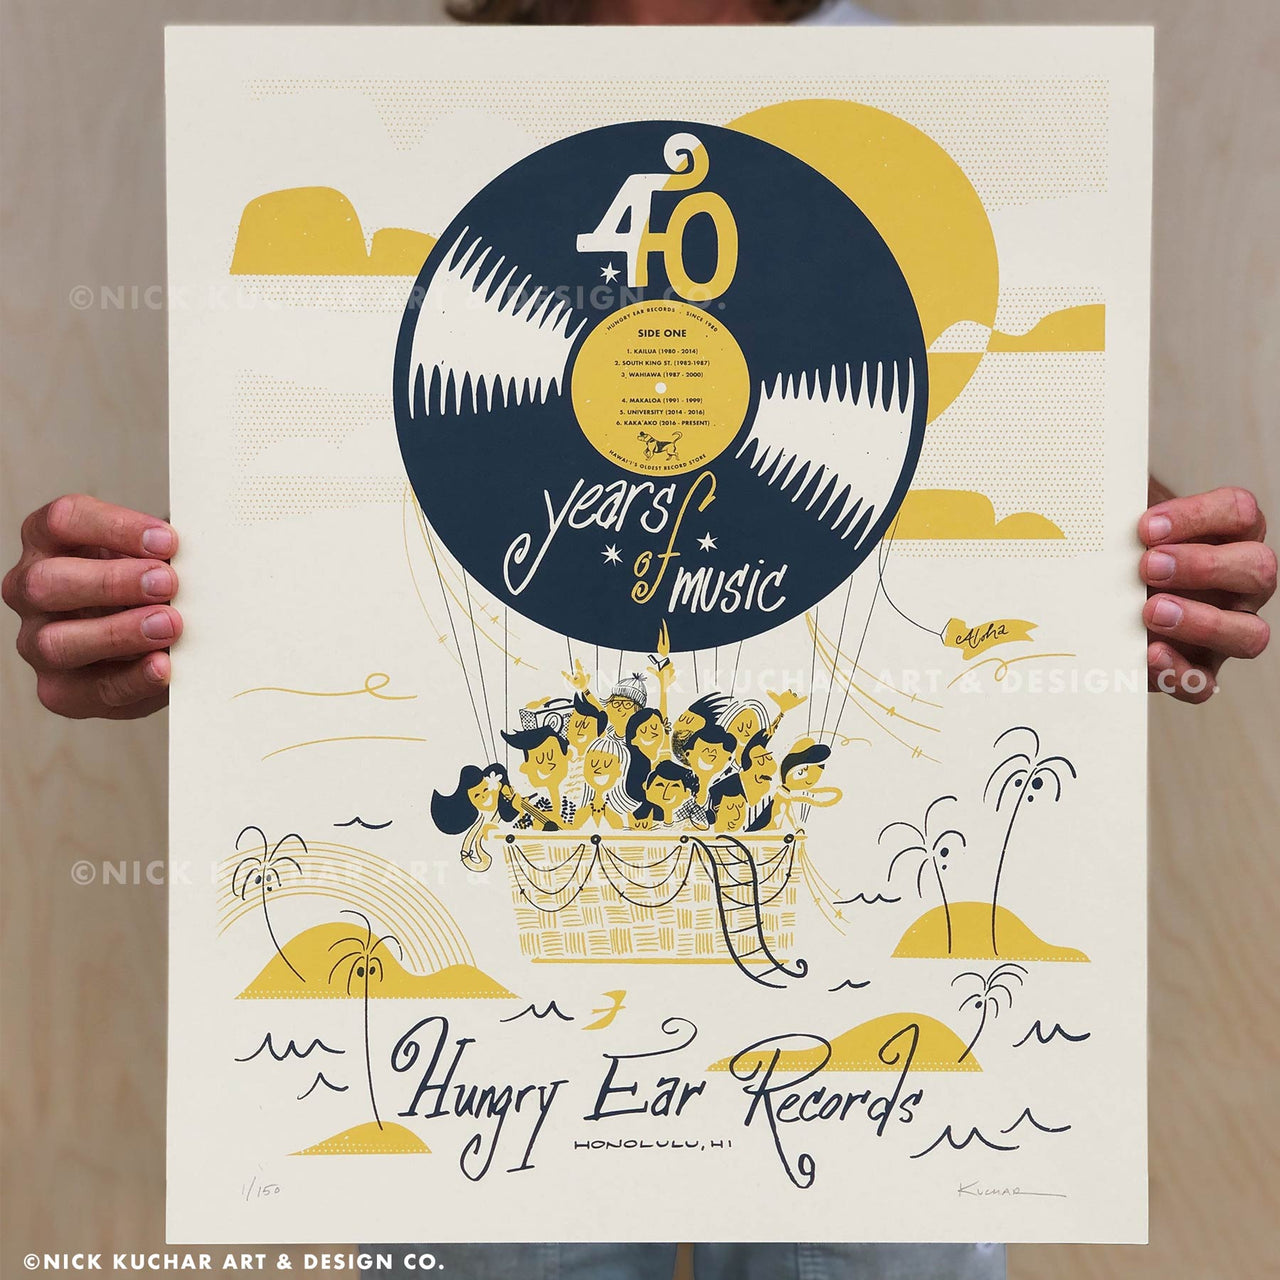 Hungry Ear records vinyl 40th anniversary limited edition screen print by Nick Kuchar